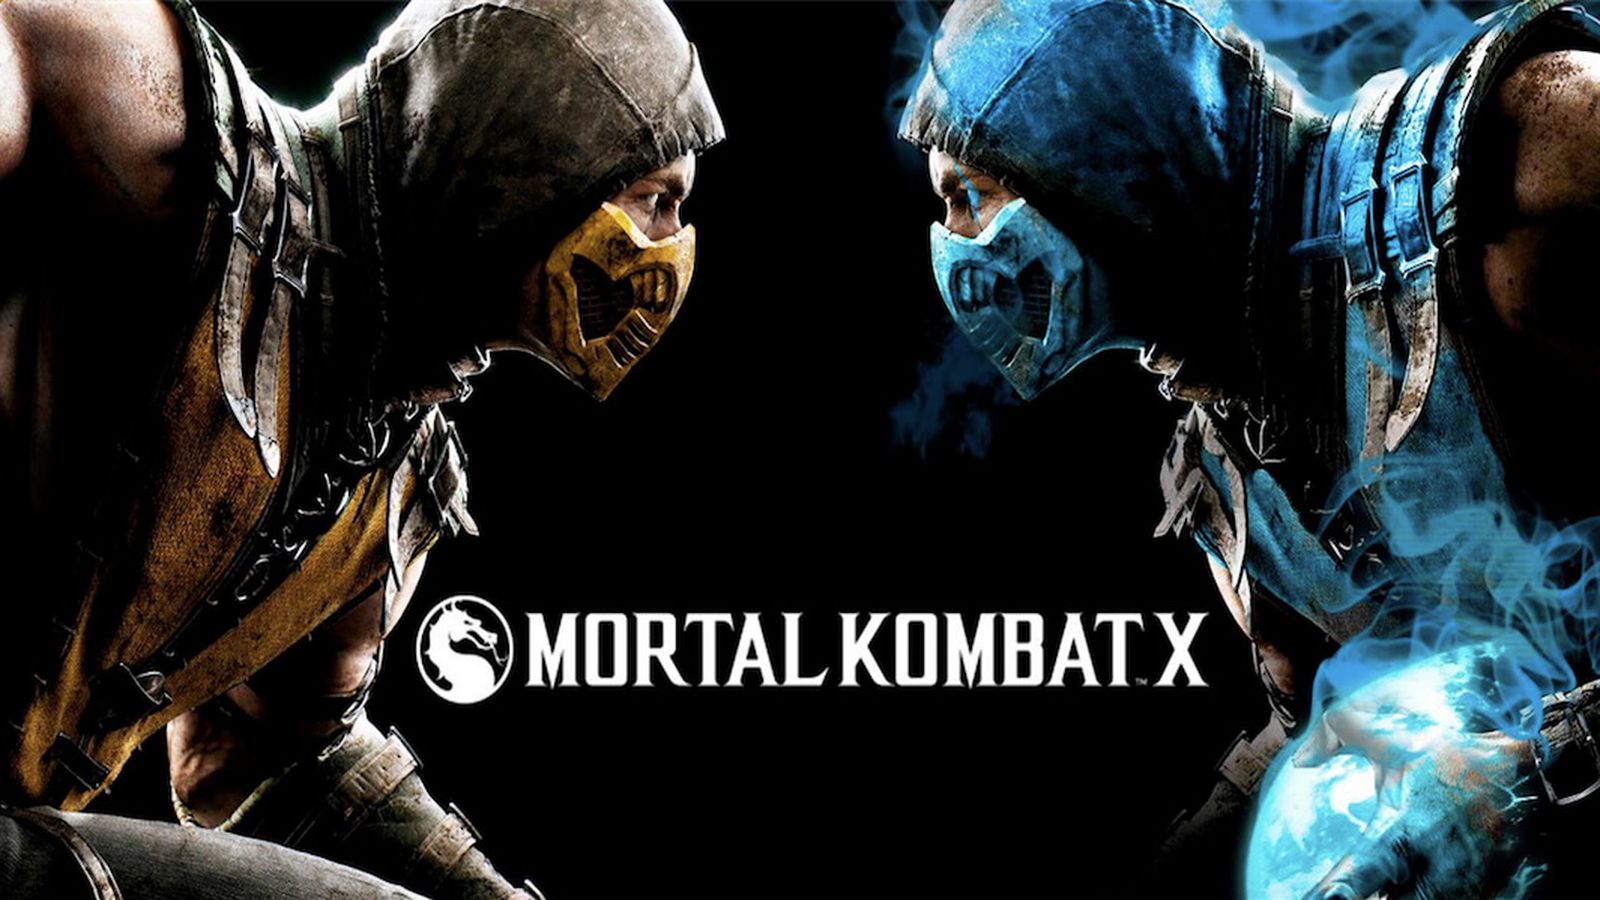 scorpion mortal kombat x wallpaper,action adventure game,games,movie,pc game,fictional character